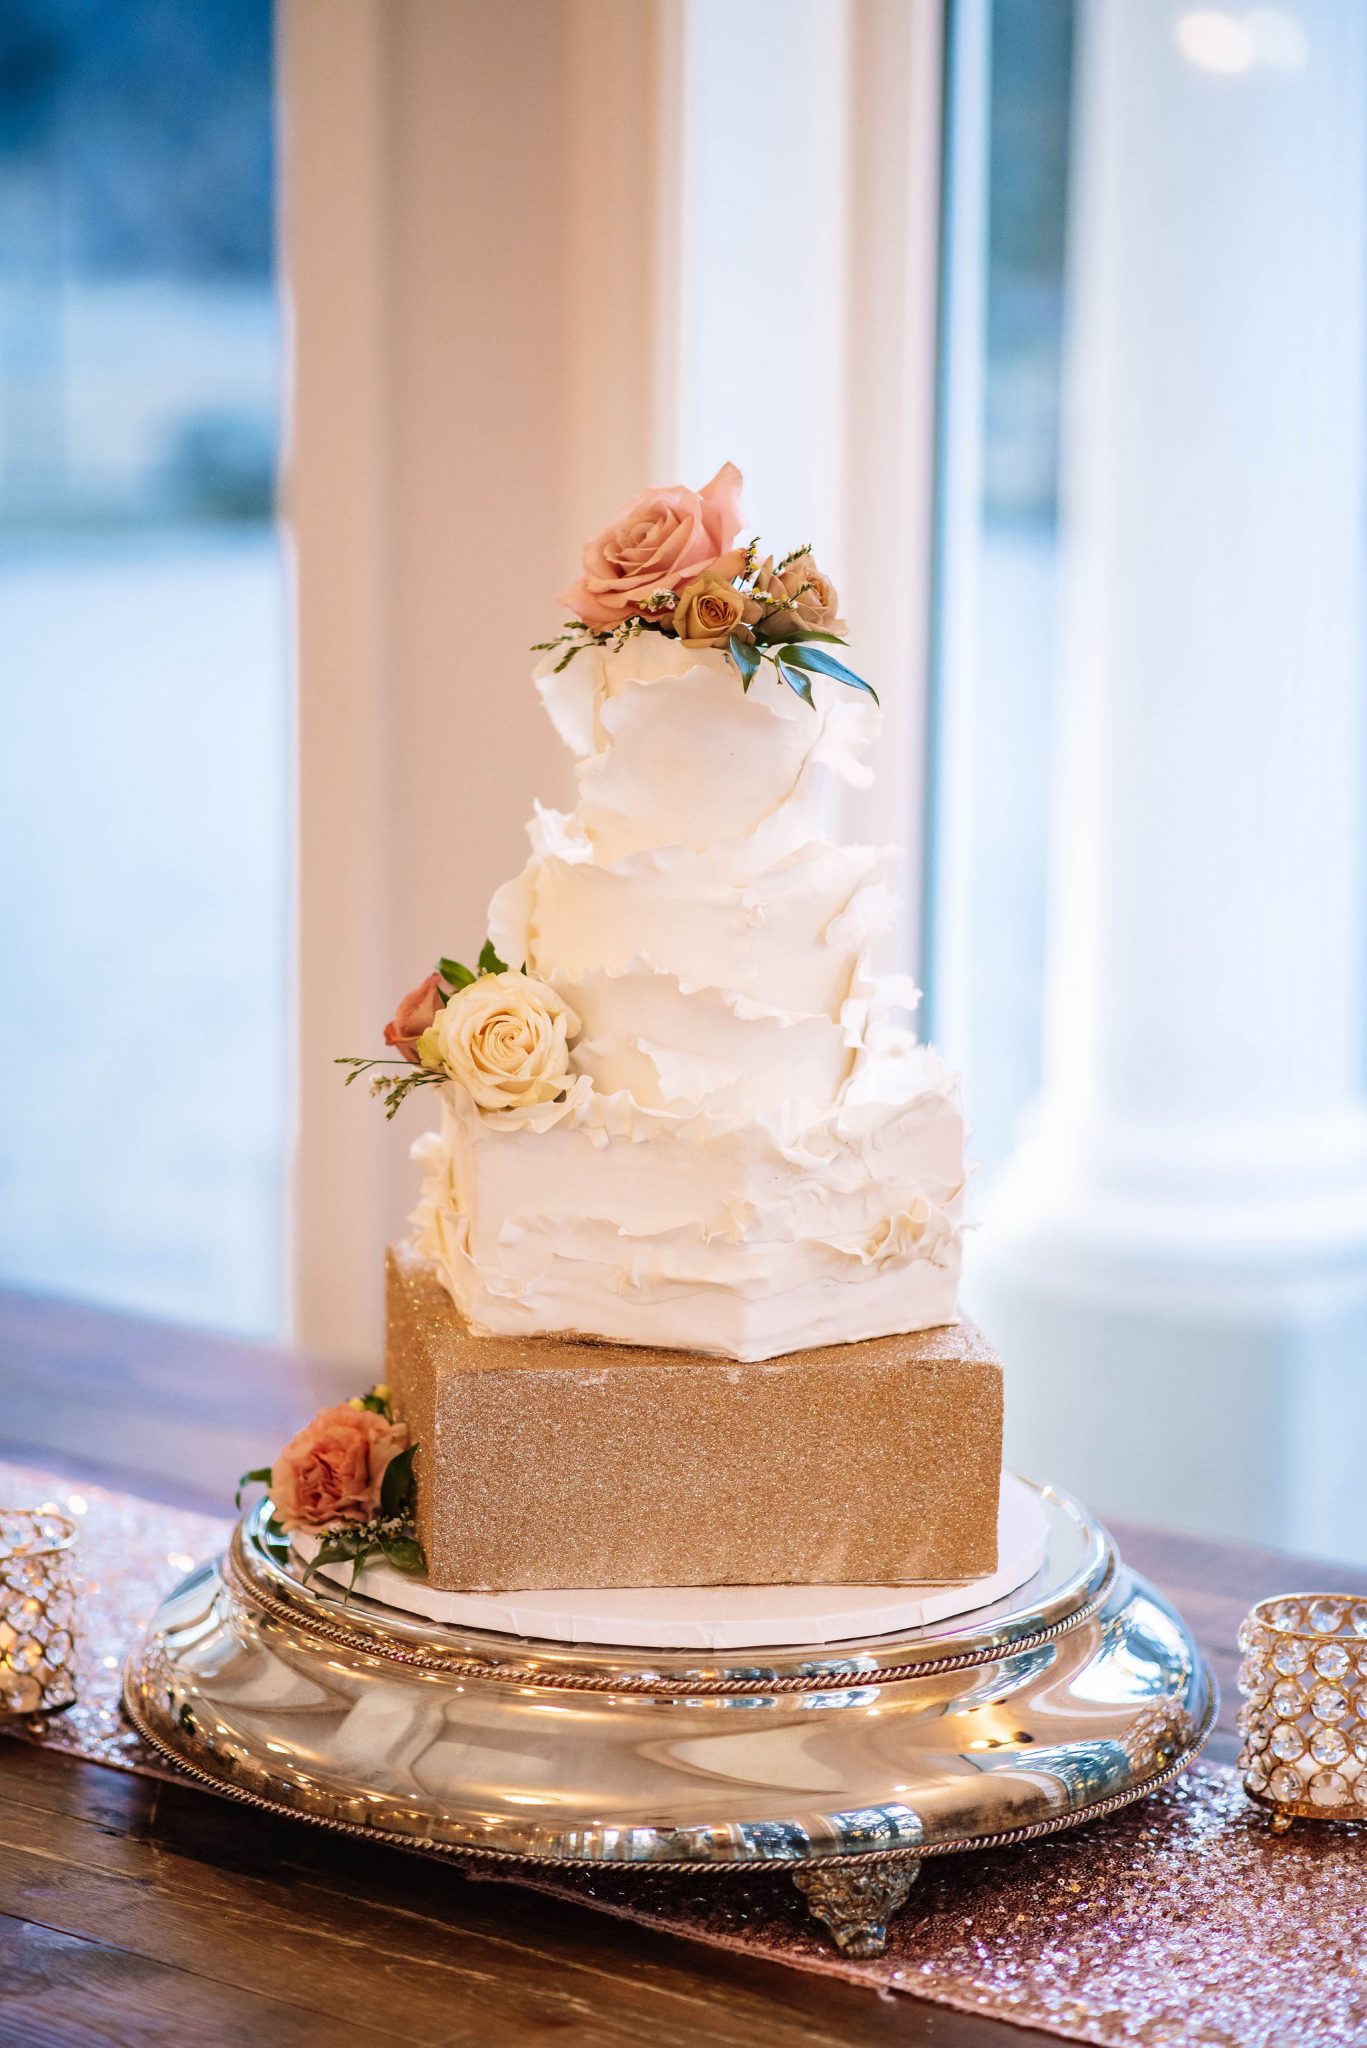 Soft white ruffle icing and metallic gold accents on this three tier wedding cake for an enchanting ballroom wedding at the Norland Historic Estate